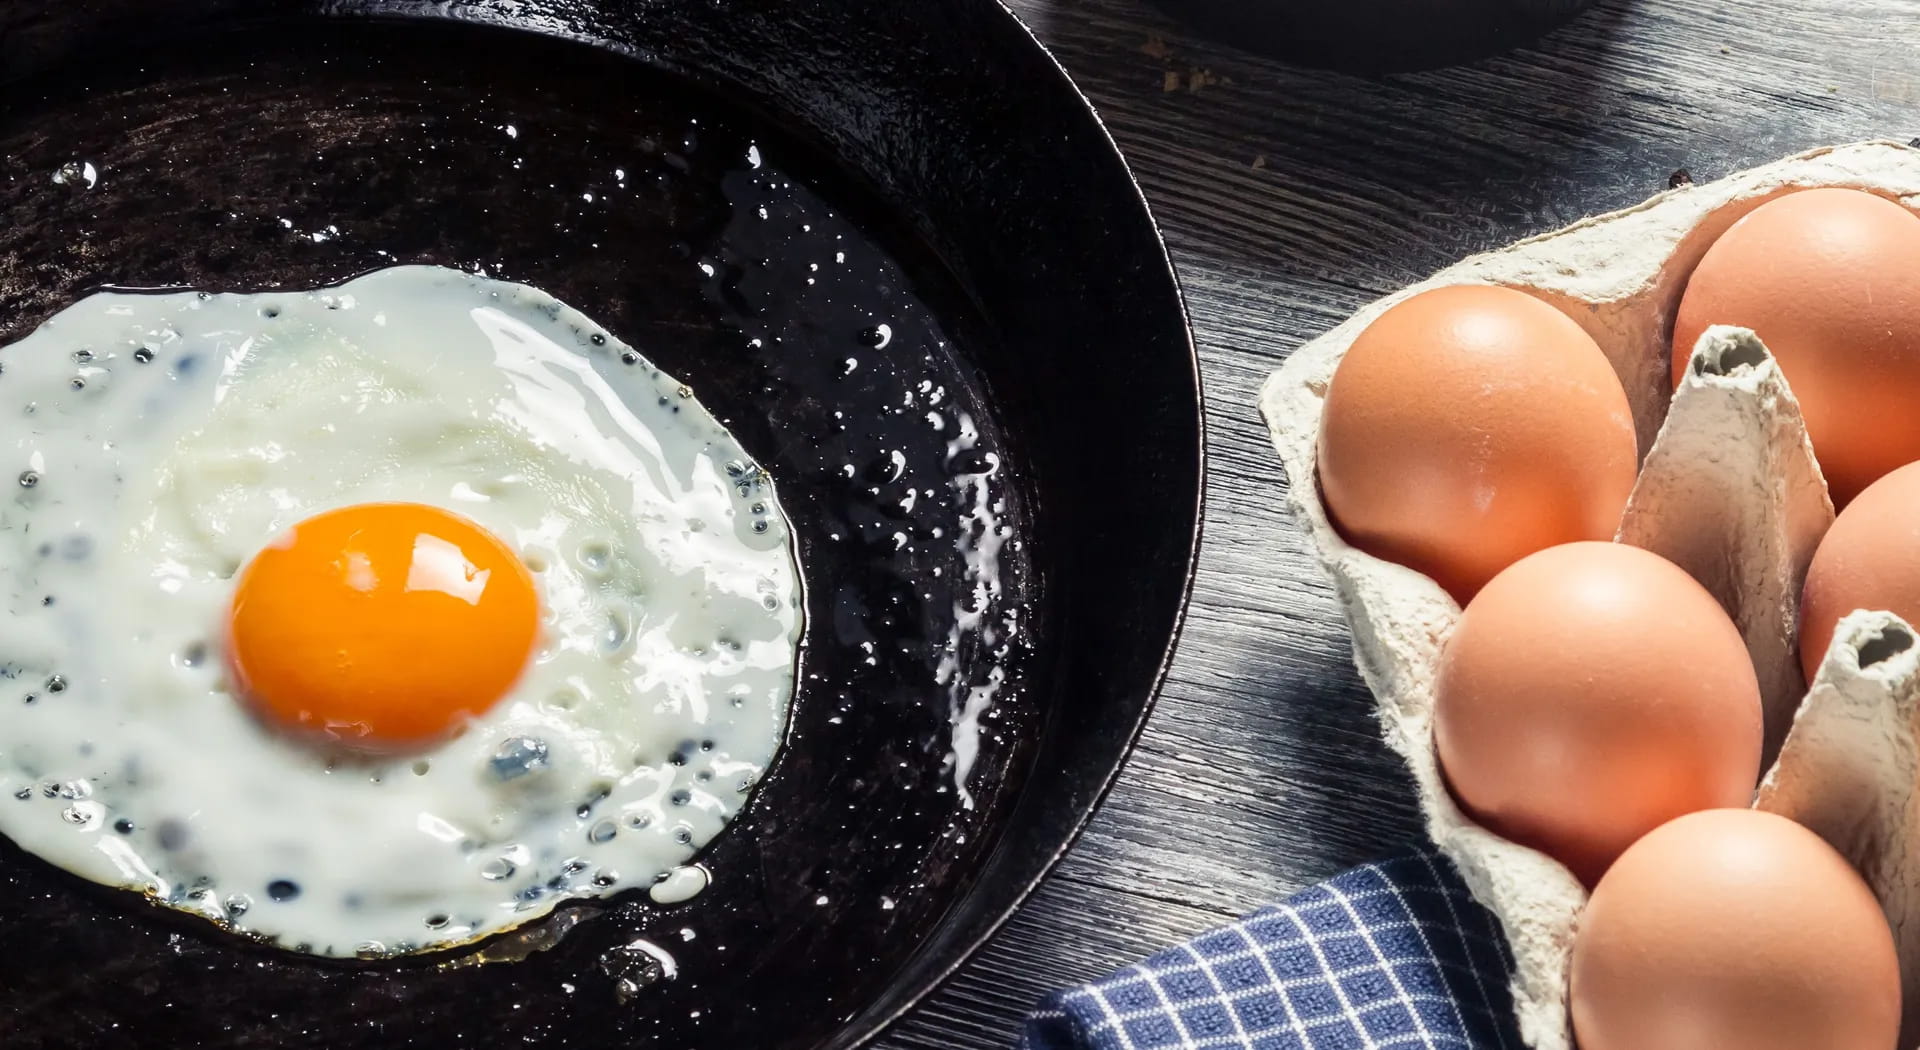 The 10 mistakes not to make when cooking eggs